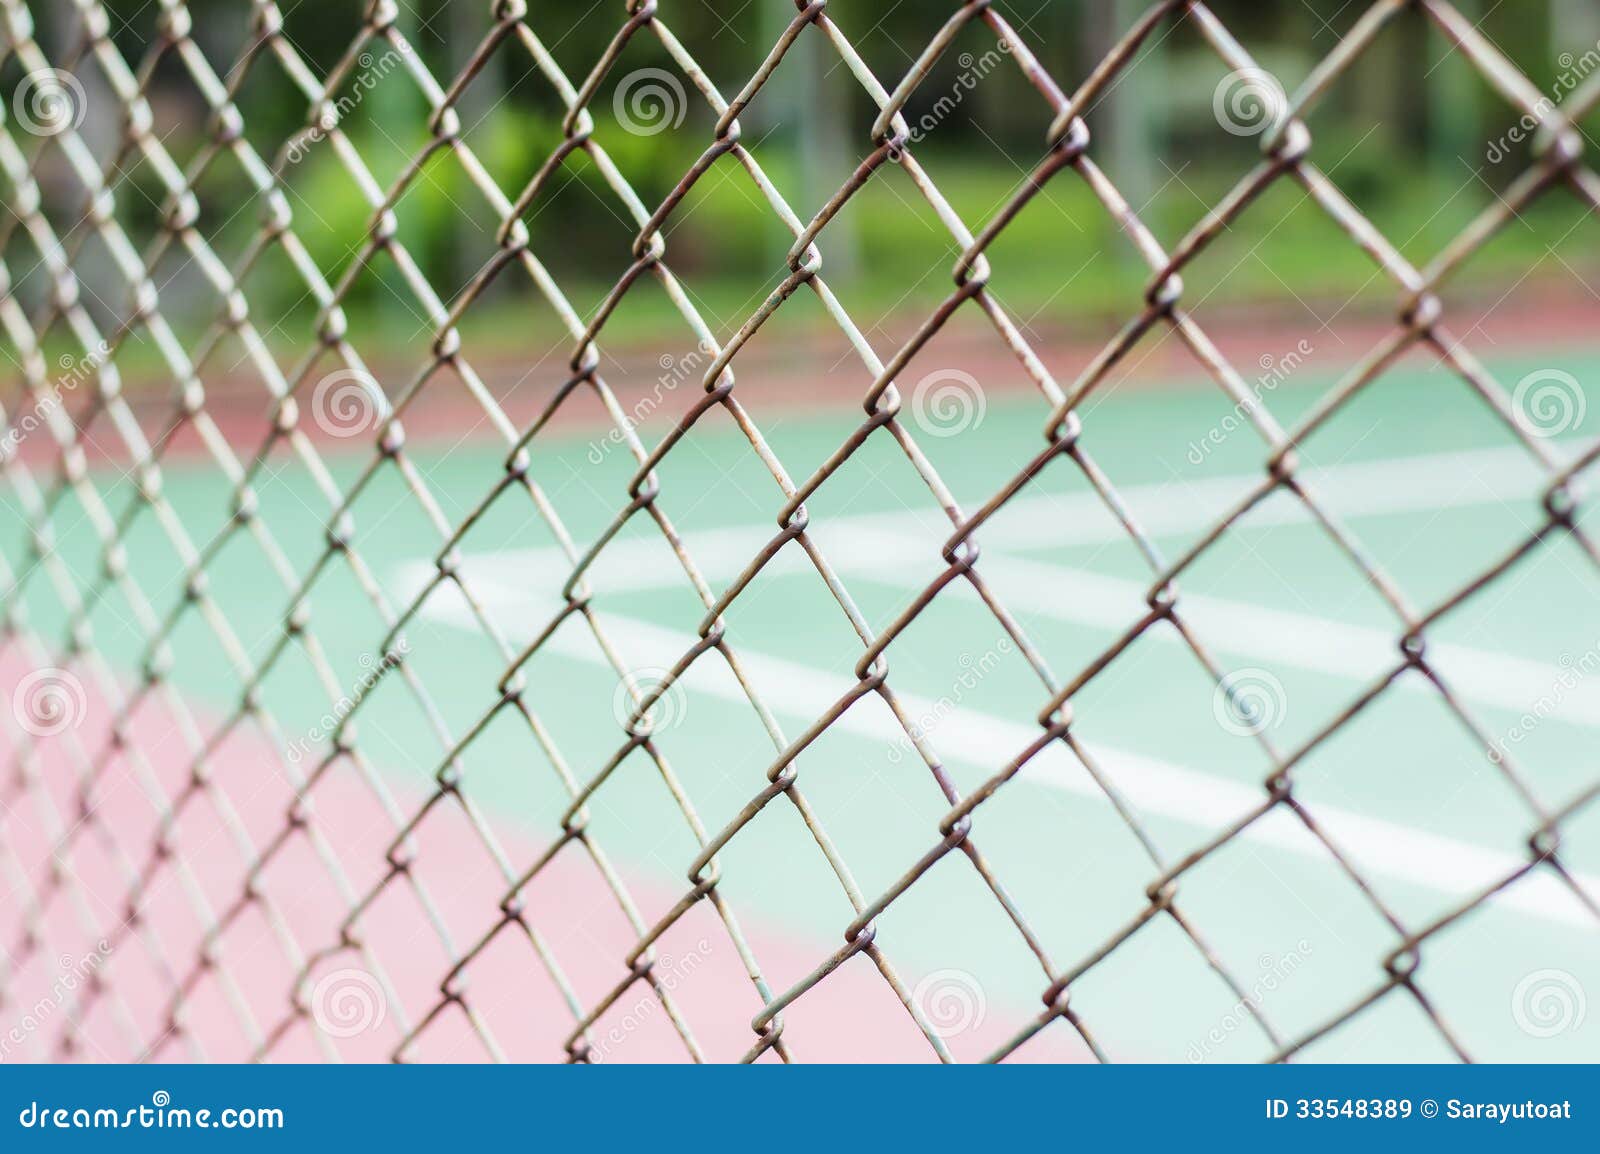 Fence of Chicken Net in Metal with Barbed Wire Stock Image - Image of  linkage, mesh: 230268519